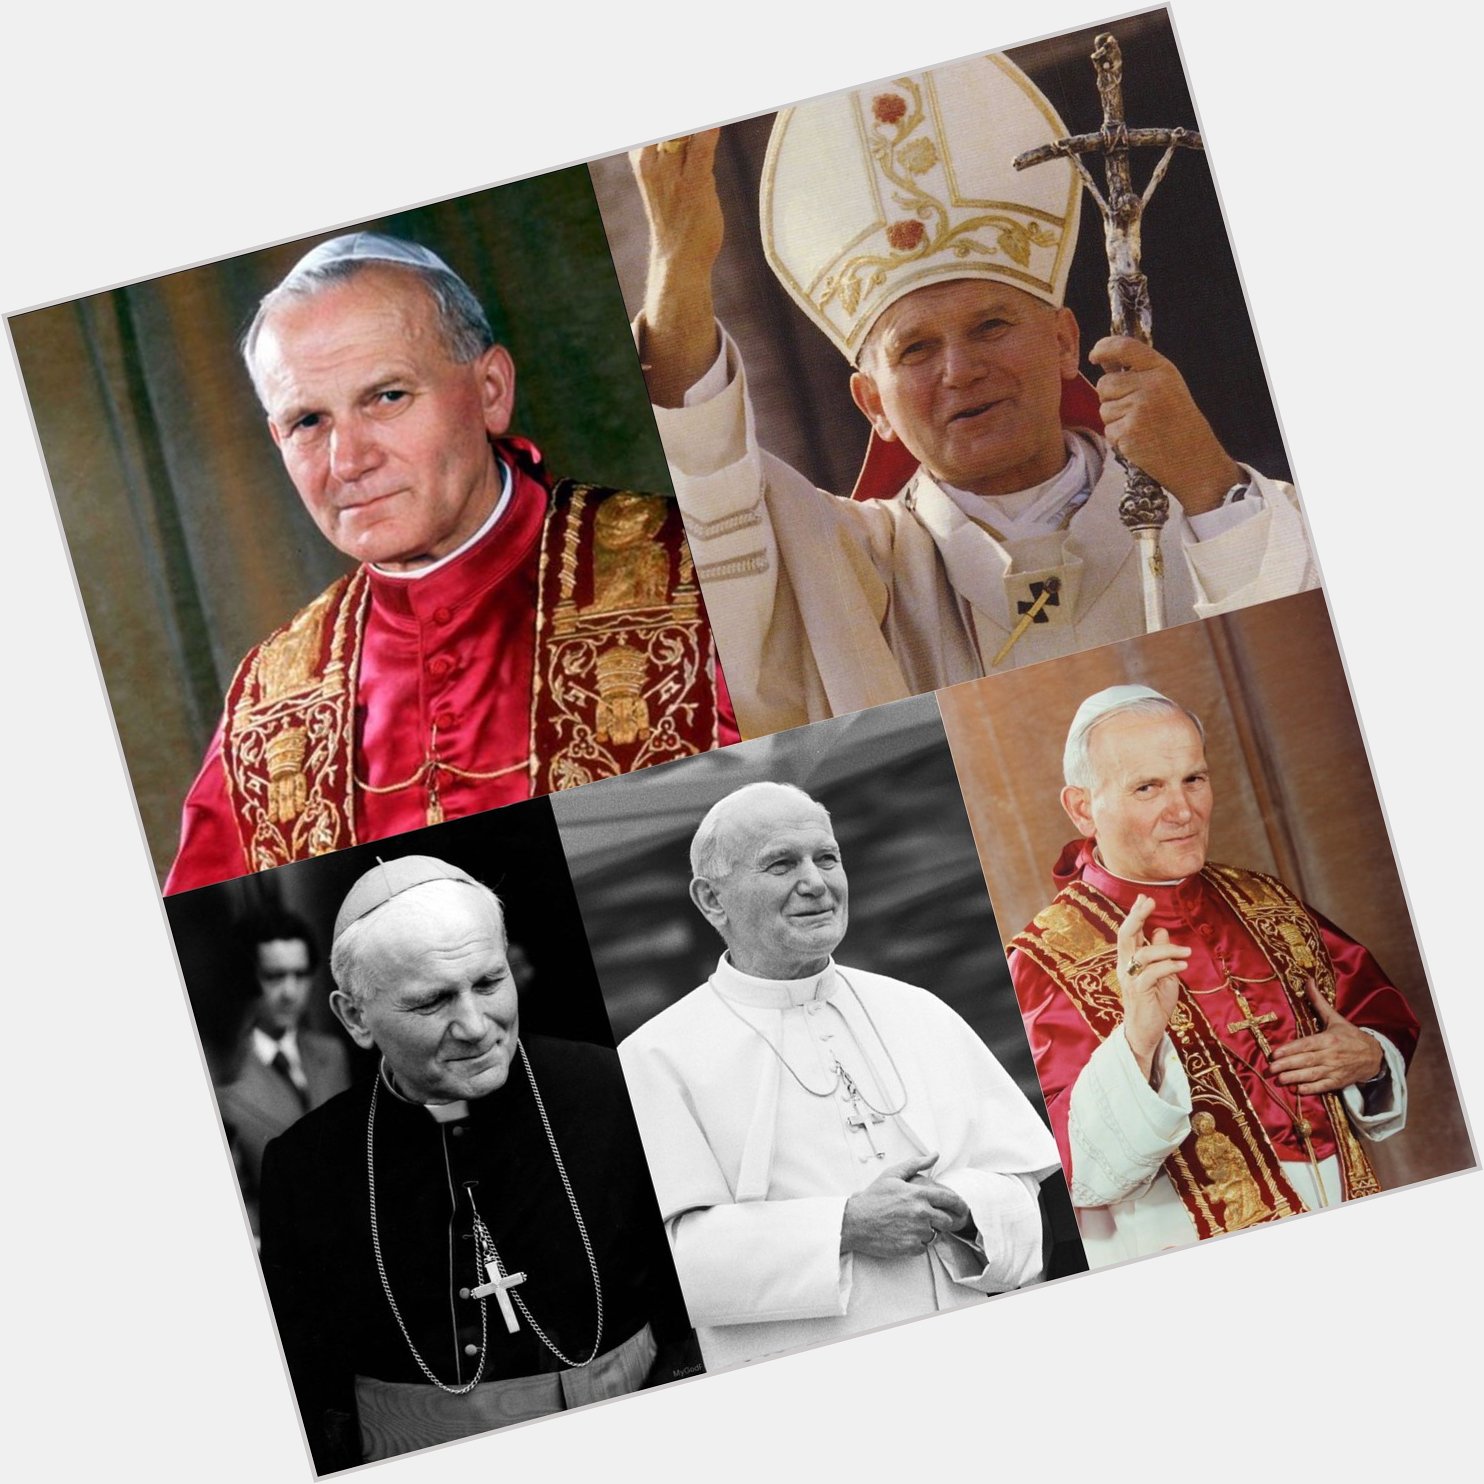 Happy 101 birthday to Pope John Paul II up in heaven. May he Rest In Peace .  